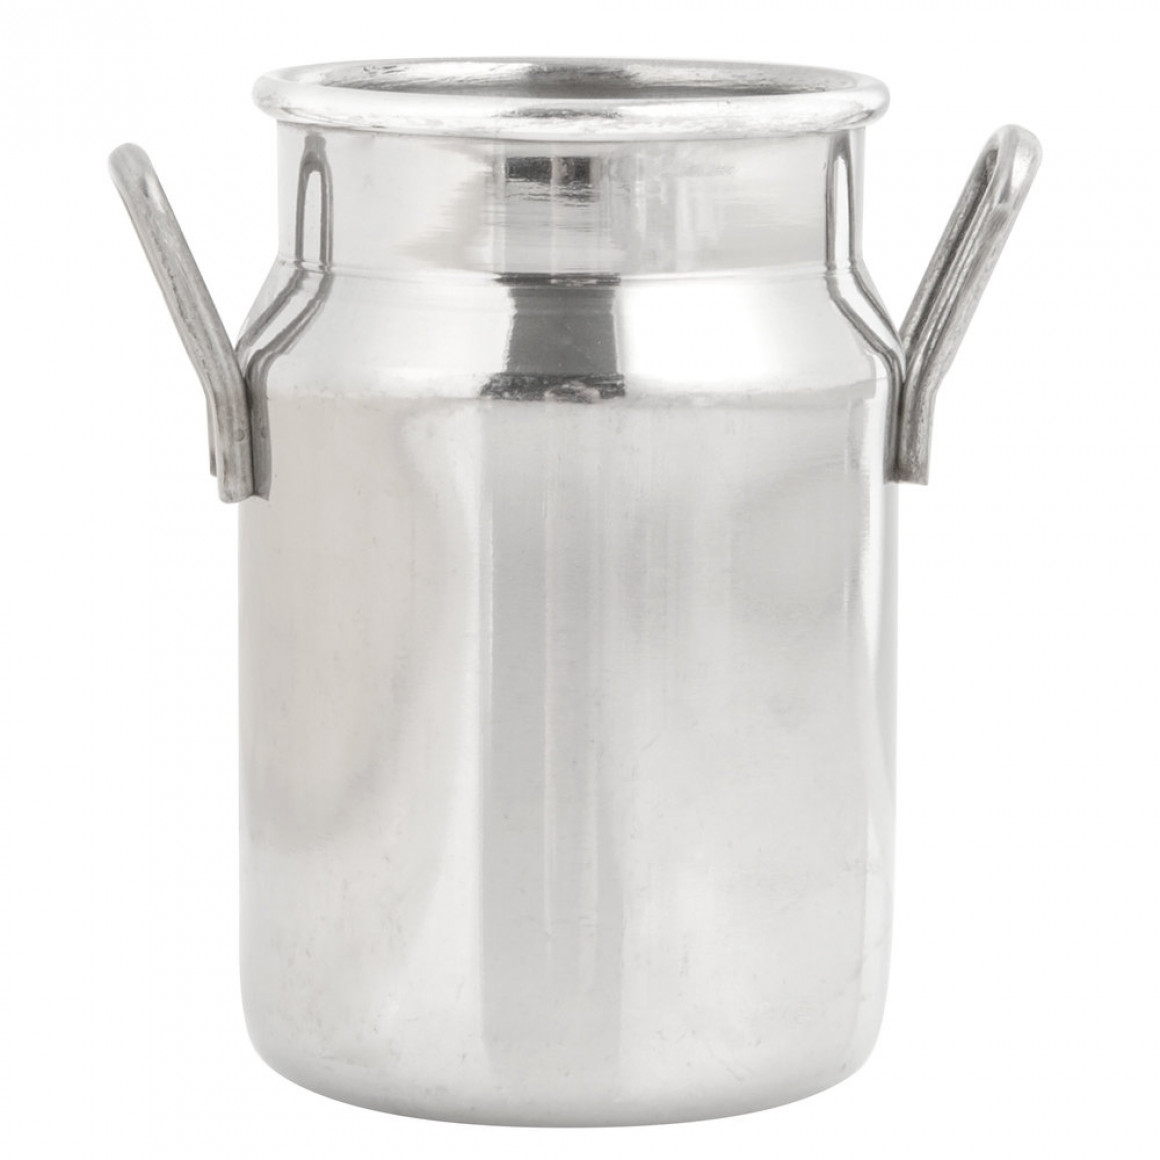 STAINLESS STEEL MILK CAN, 5 OZ.